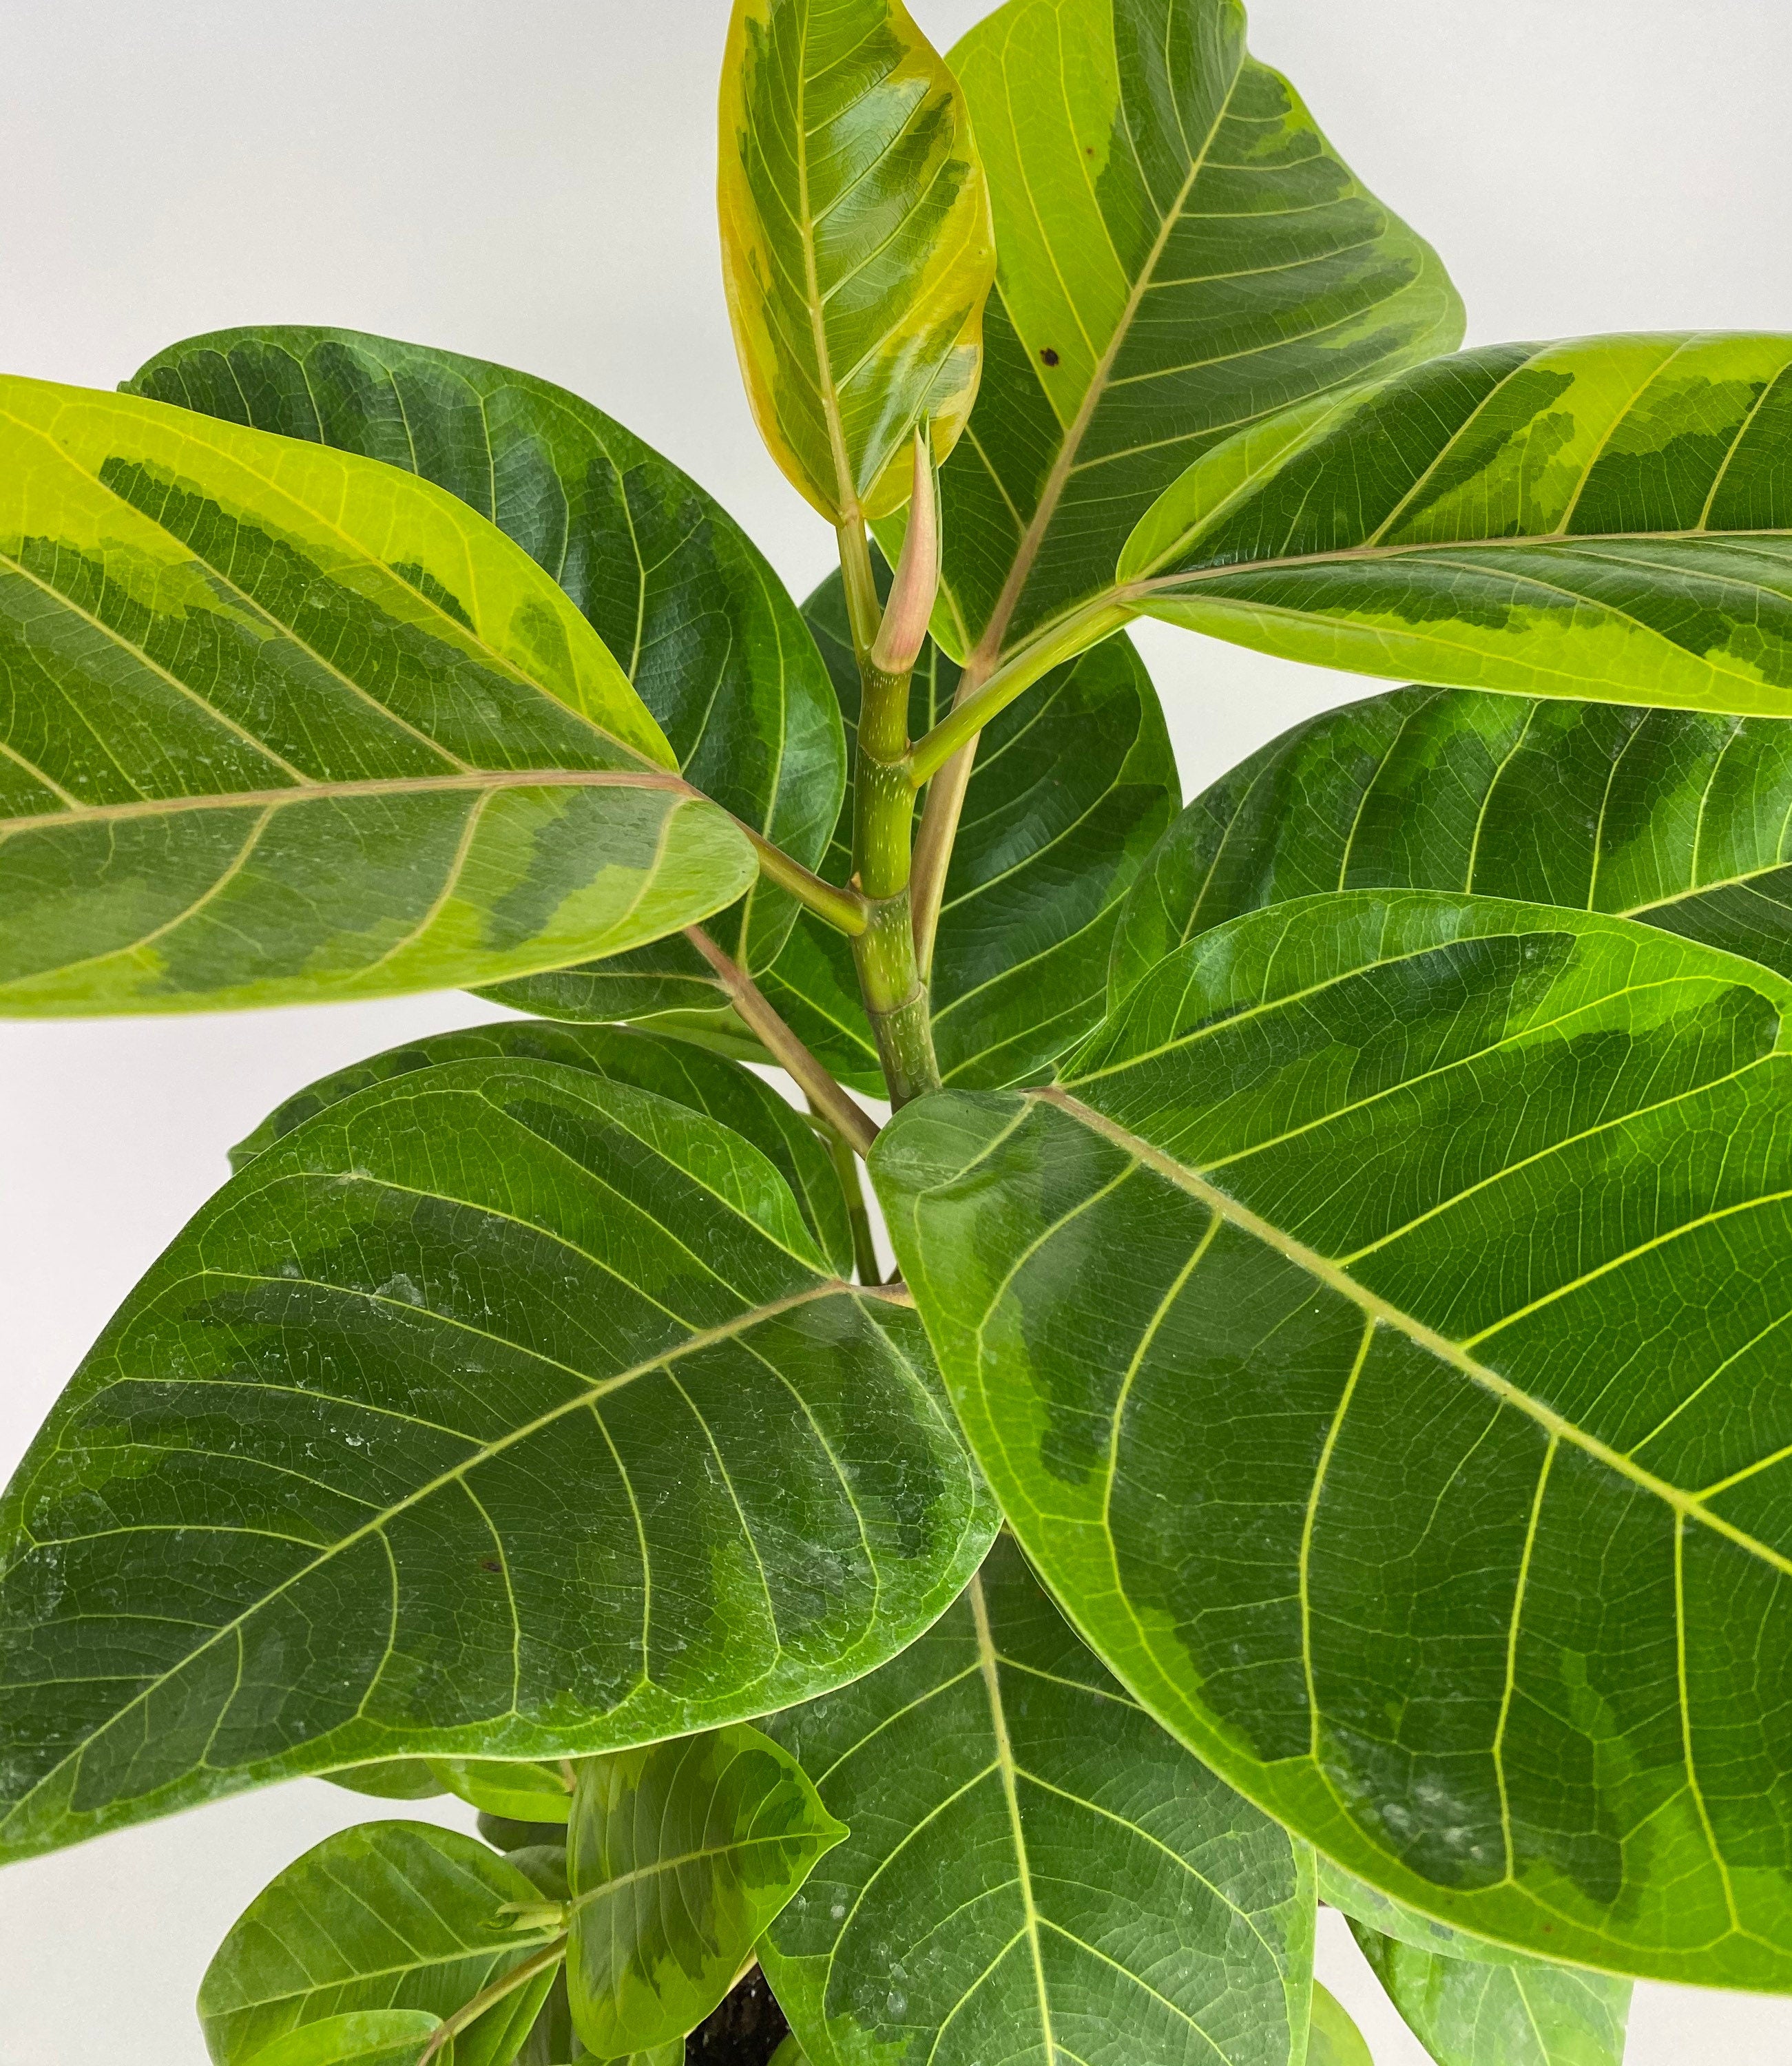 Ficus Altissima Tree Form Double, Variegated Yellow Gem Rubber Tree